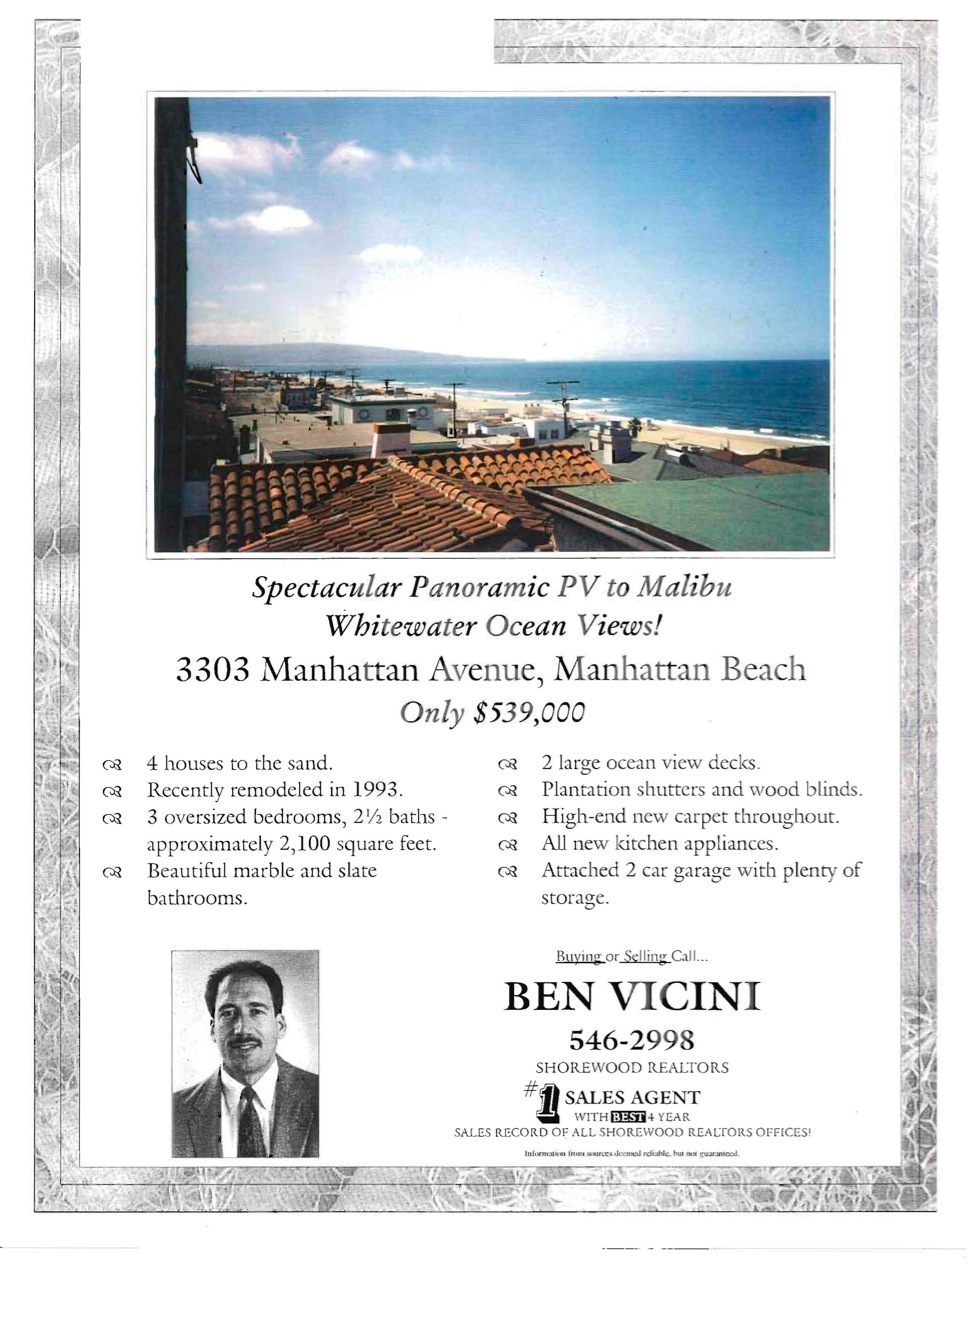 Vicini's Past Listings & Sales_Page_52